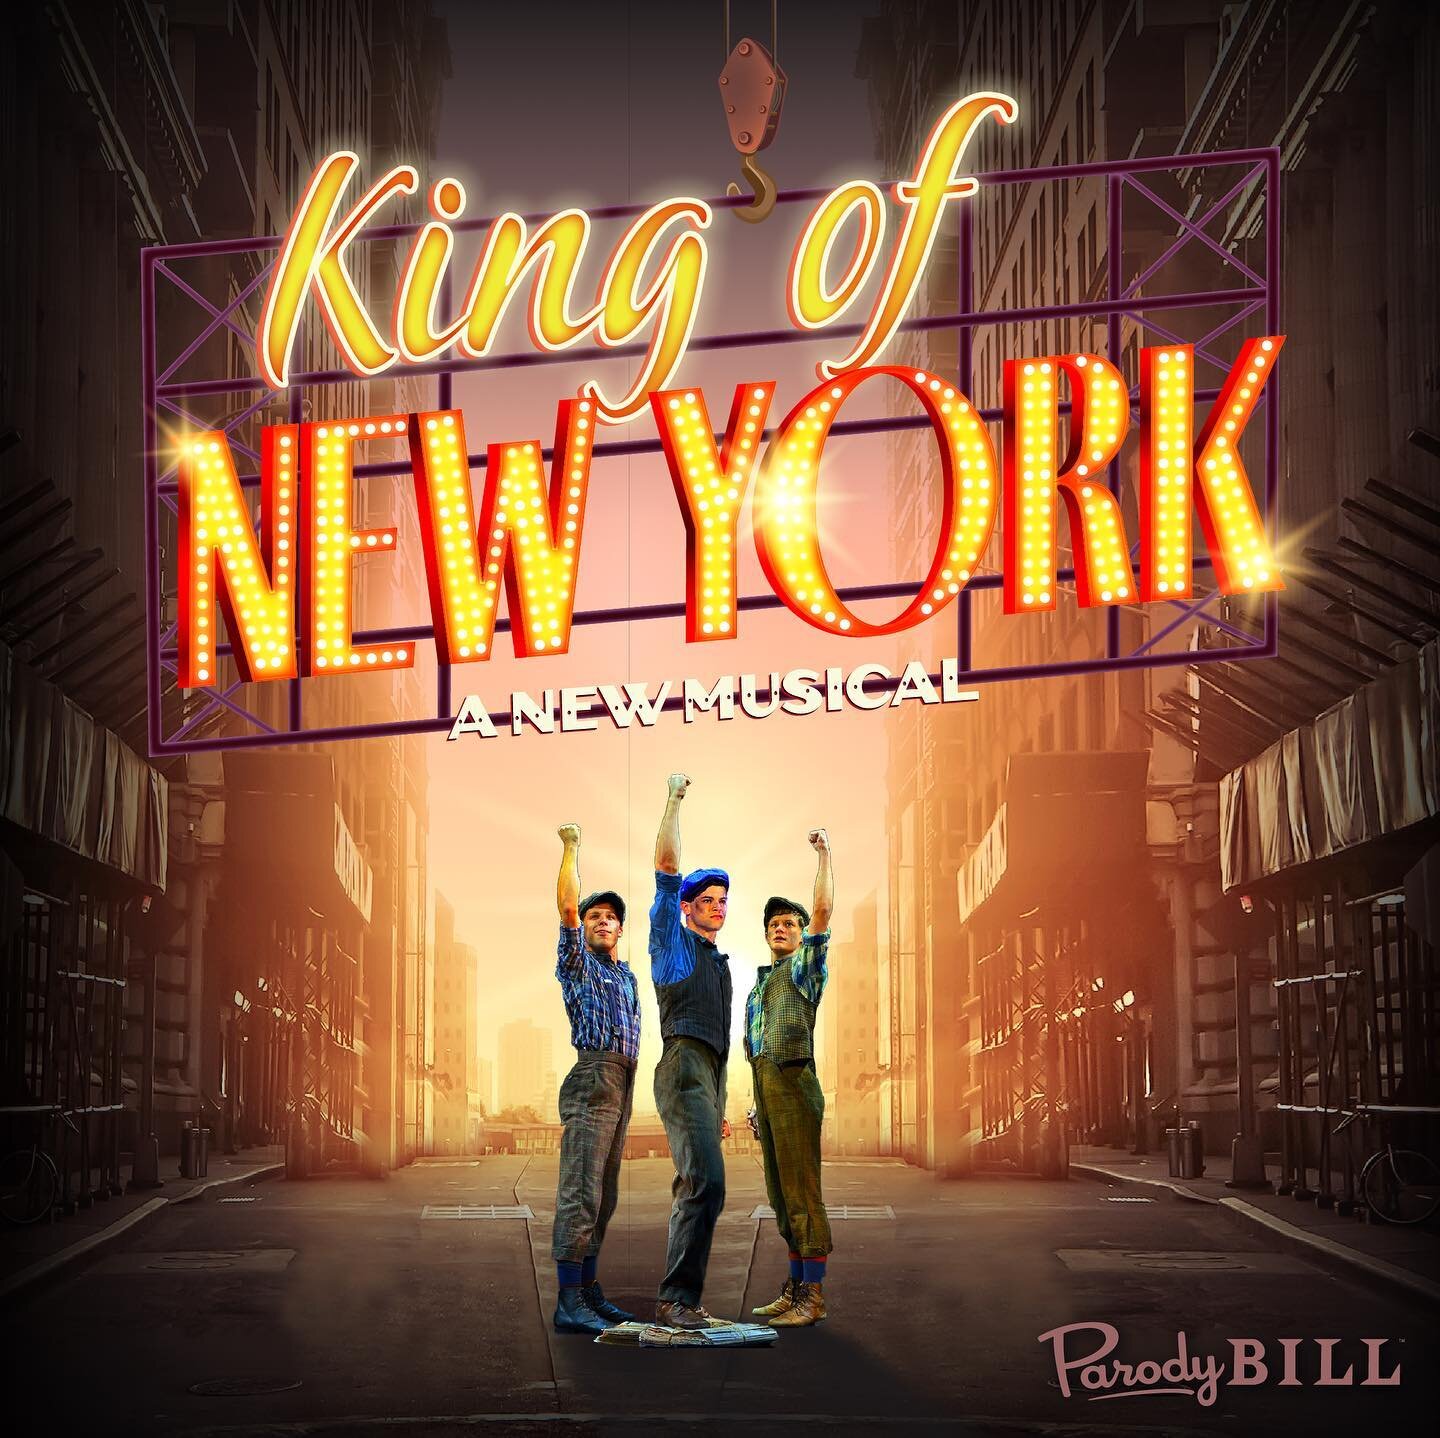 Look at me, I&rsquo;m the King of New York! 🗞️🌆

We&rsquo;re counting down to @TheTonyAwards with all-new @Parodybill mashups inspired by the poster art from this season&rsquo;s musicals. 

&ldquo;King of New York&rdquo; is a @Newsies parody based 